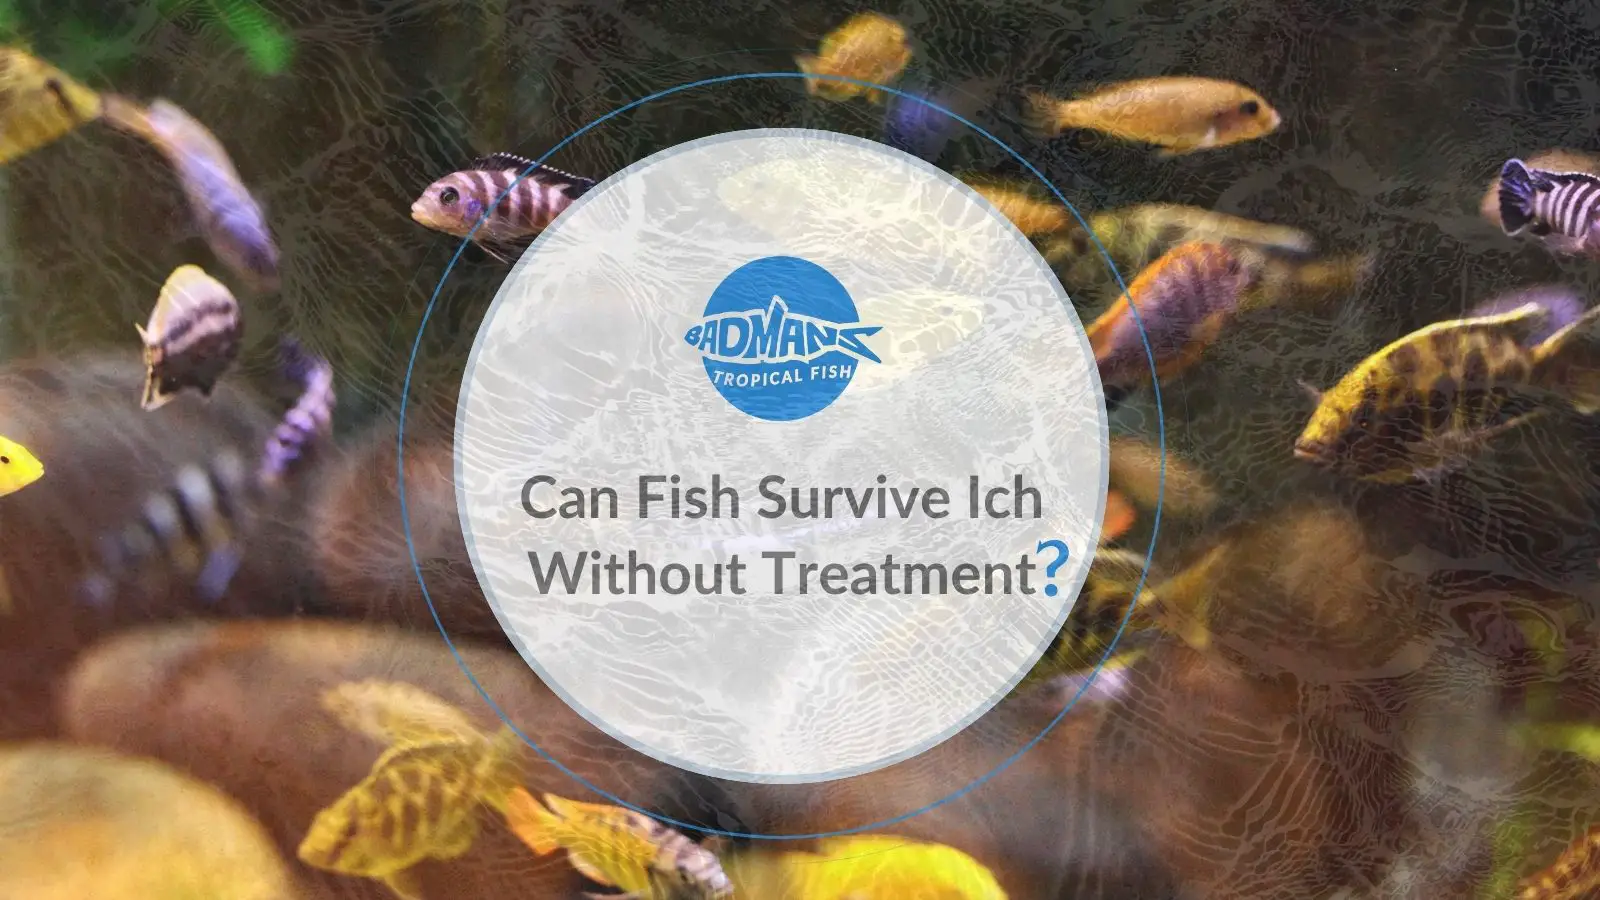 Can Ich Survive Without Fish? - Aquariumia